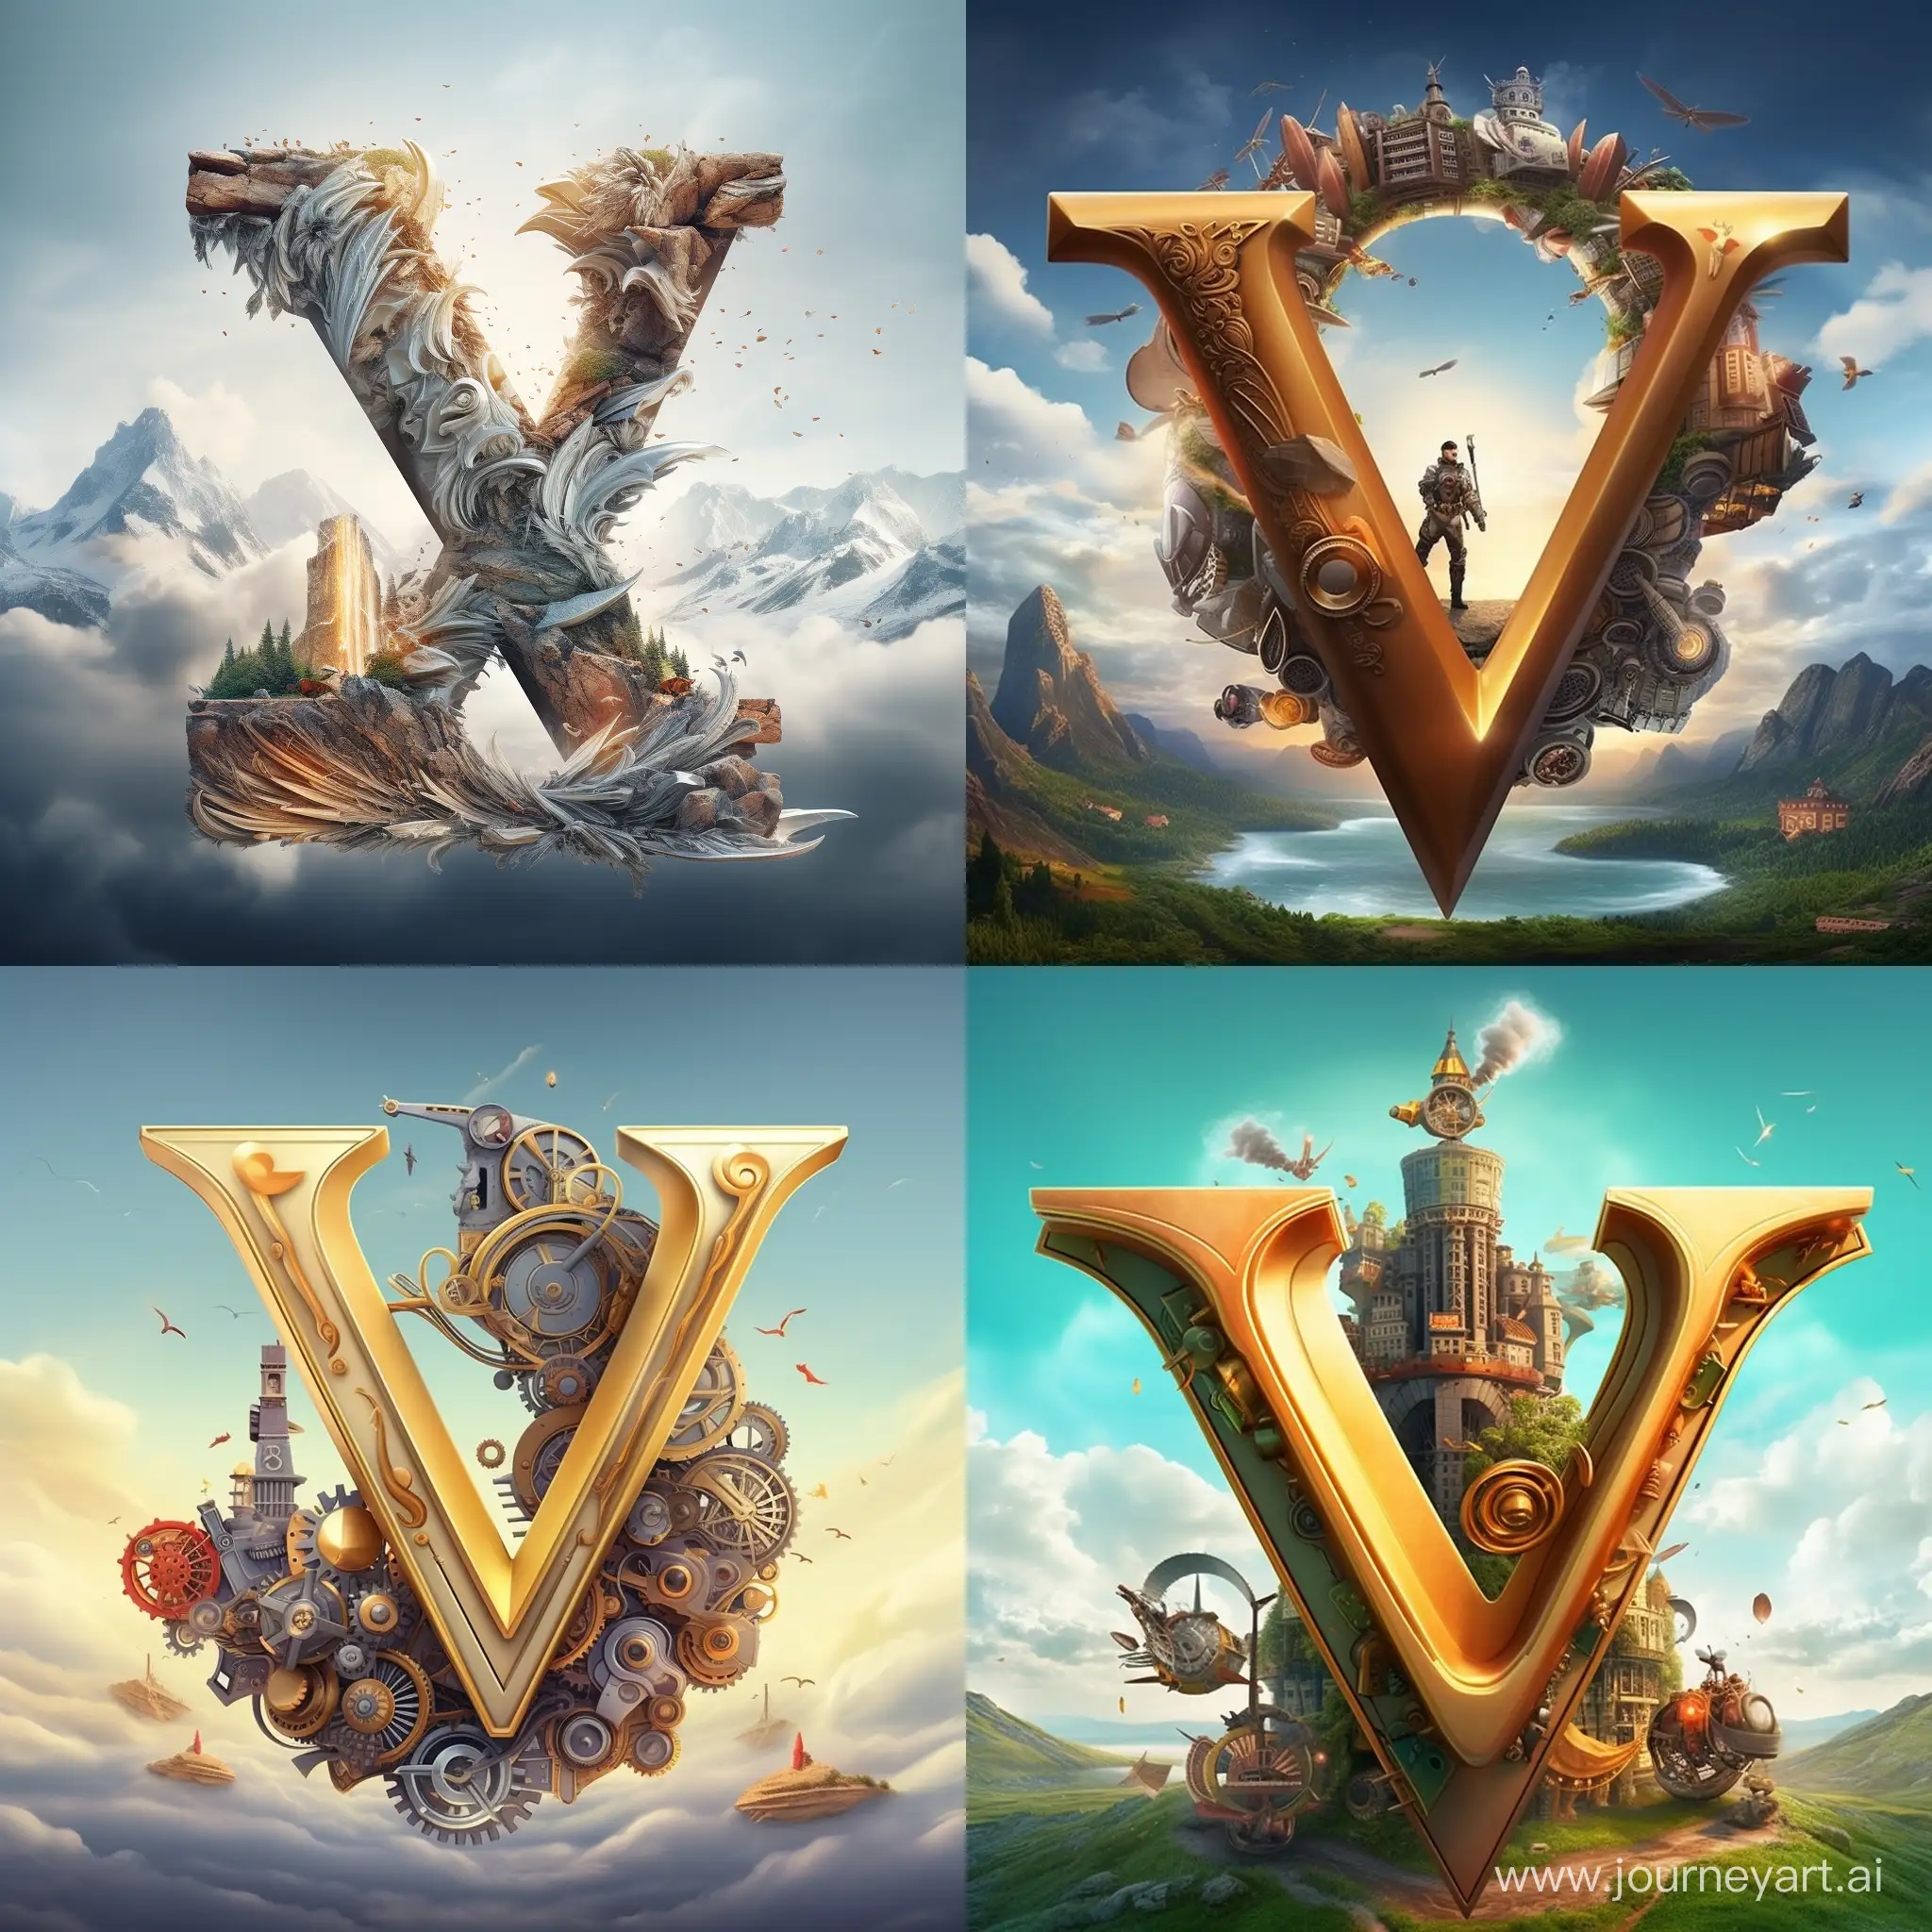 Epic-Avatar-Designs-Stylized-Letter-V-Embracing-the-Essence-of-Wind-and-Air